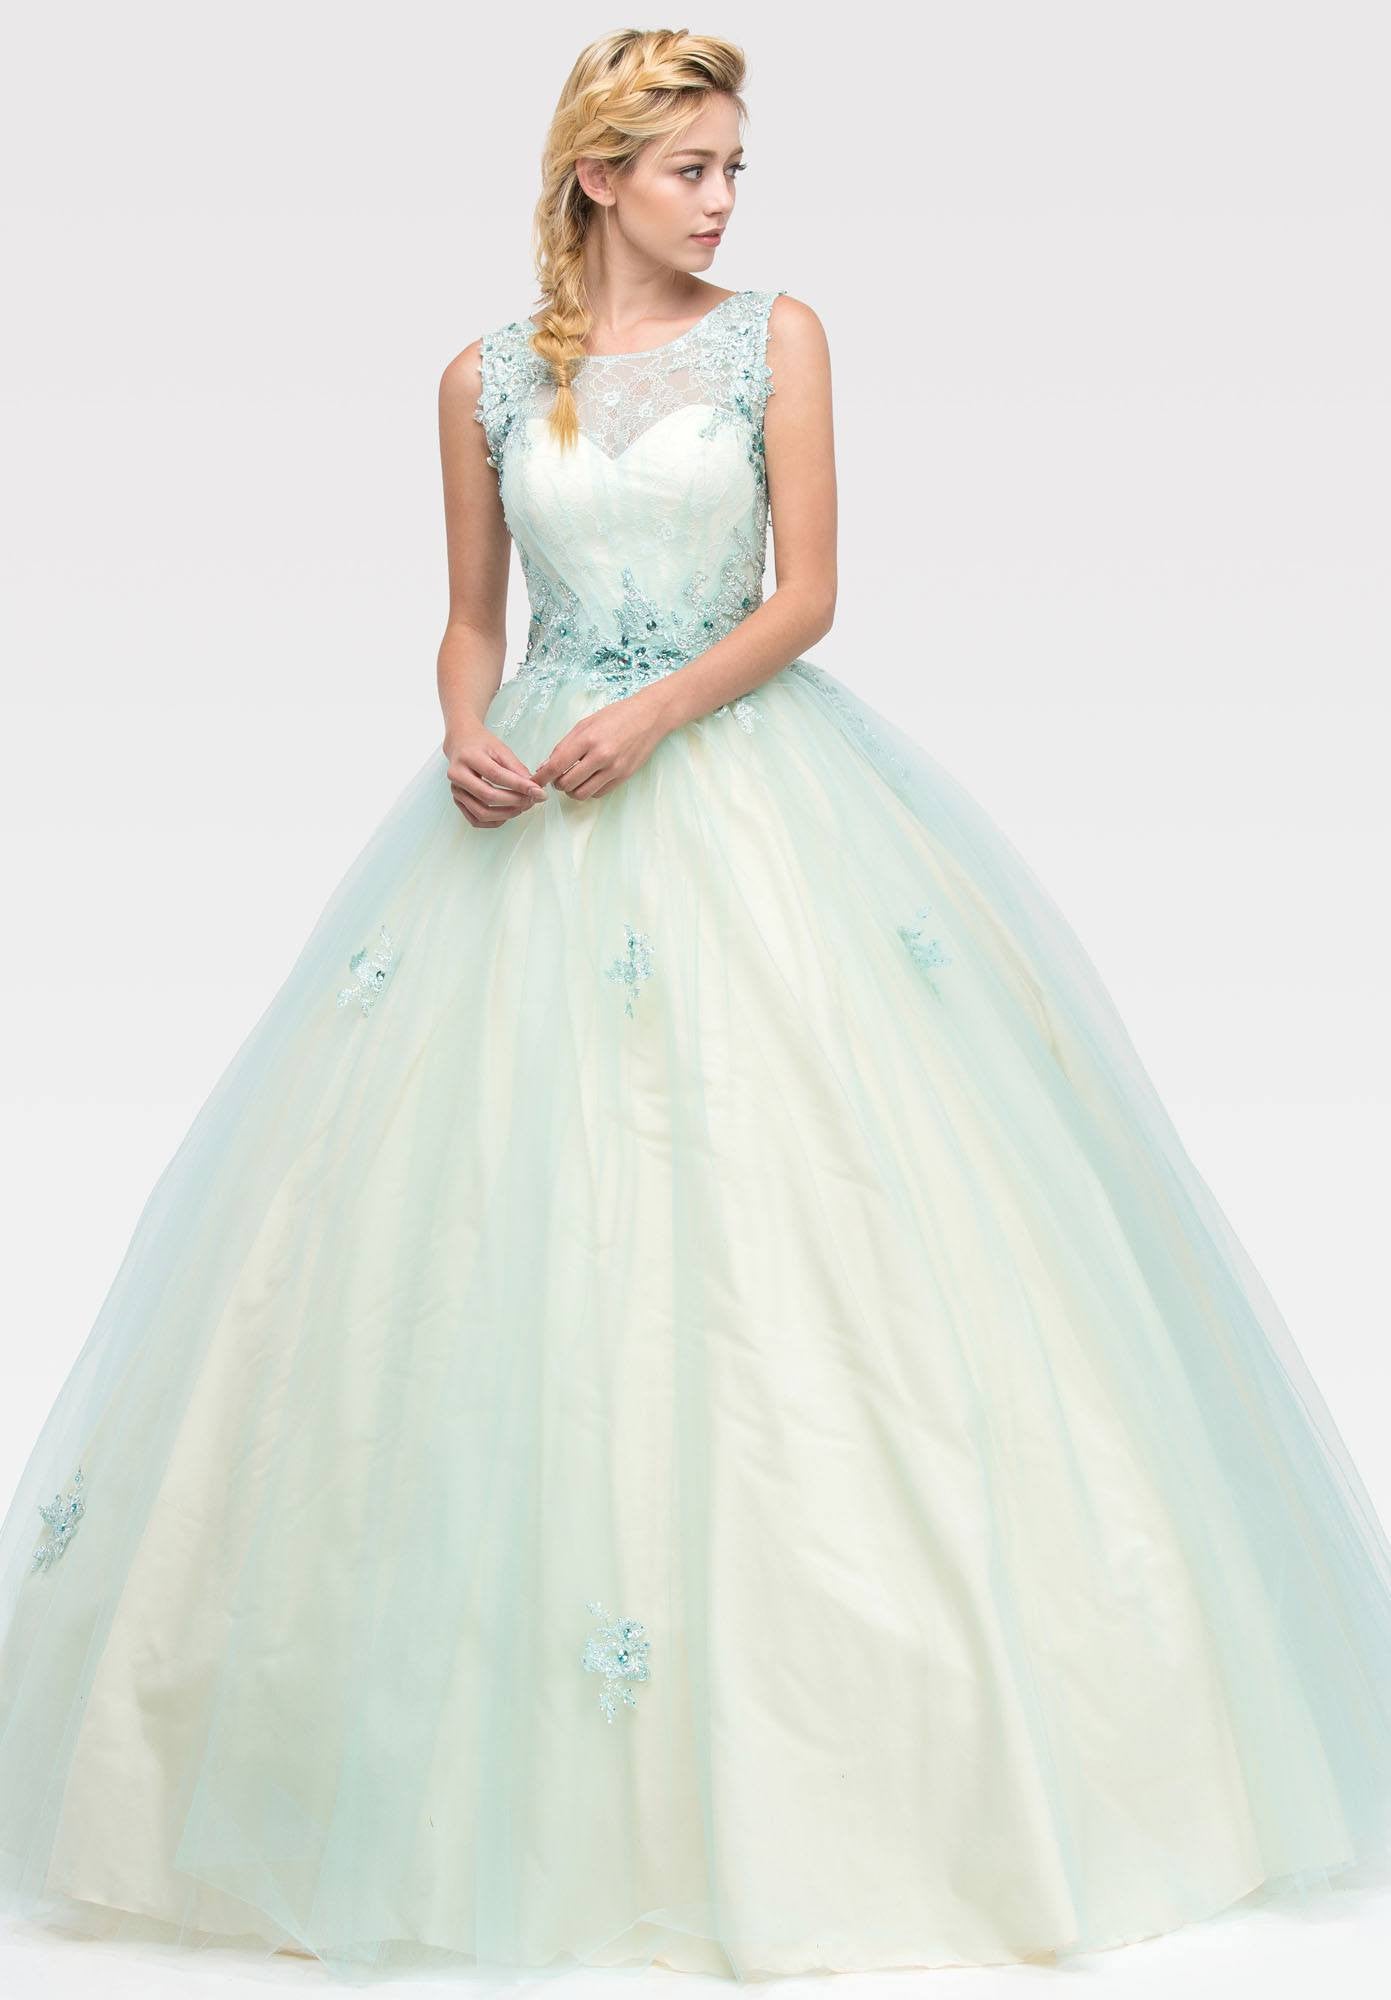 Illusion Lace Embellished Bodice Quinceanera Dress Mint/Champagne